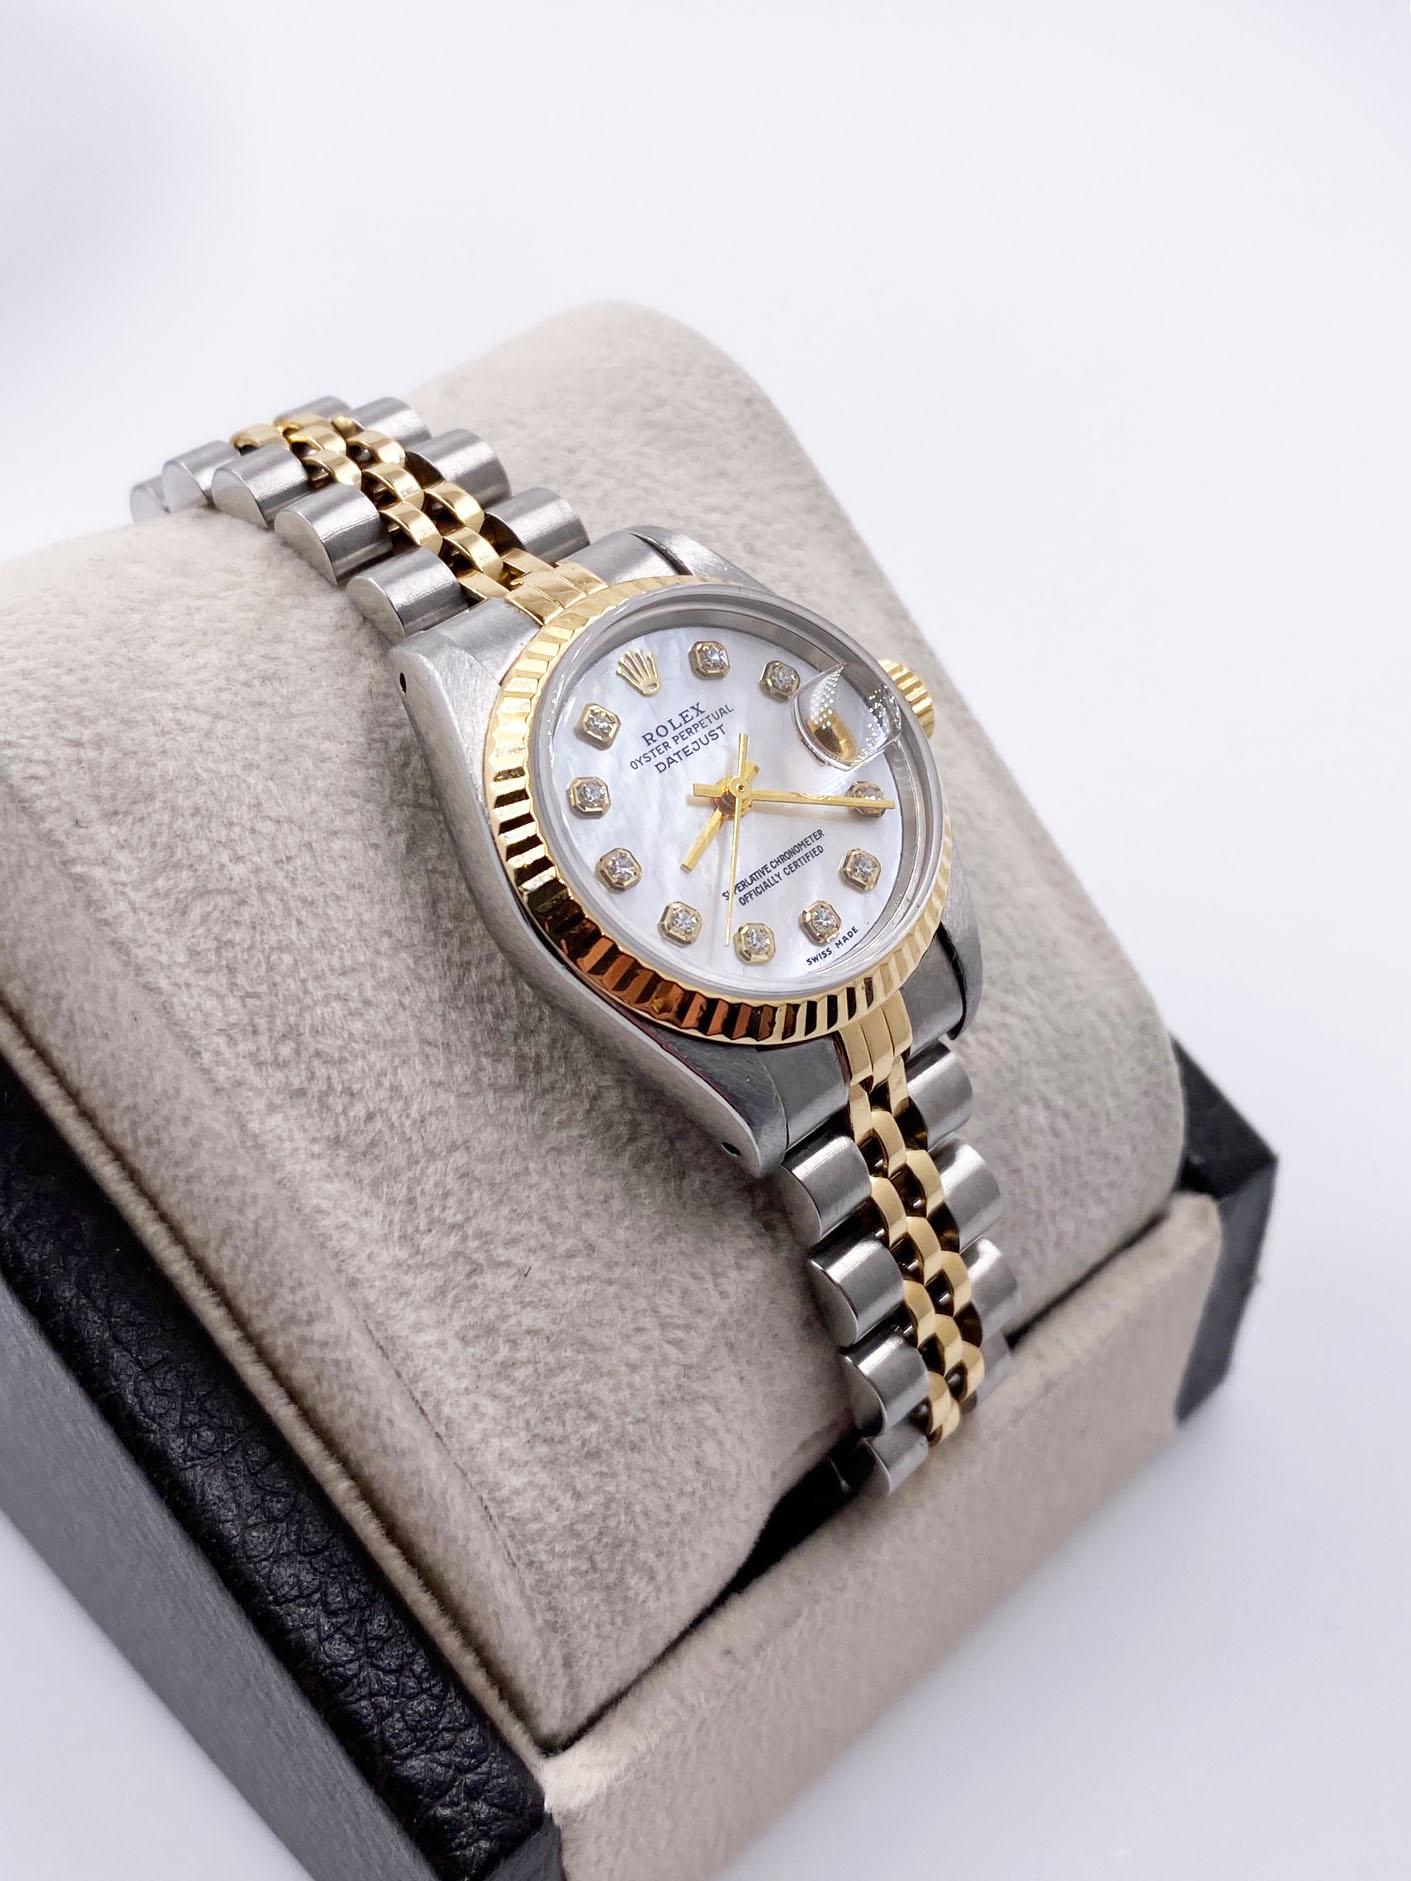 Style Number: 69173

 

Serial: S228***

 

Model: Datejust 

 

Case Material: Stainless Steel

 

Band: 18K Yellow Gold & Stainless Steel

 

Bezel:  18K Yellow Gold

 

Dial: Custom MOP Diamond Dial 

 

Face: Sapphire Crystal 

 

Case Size: